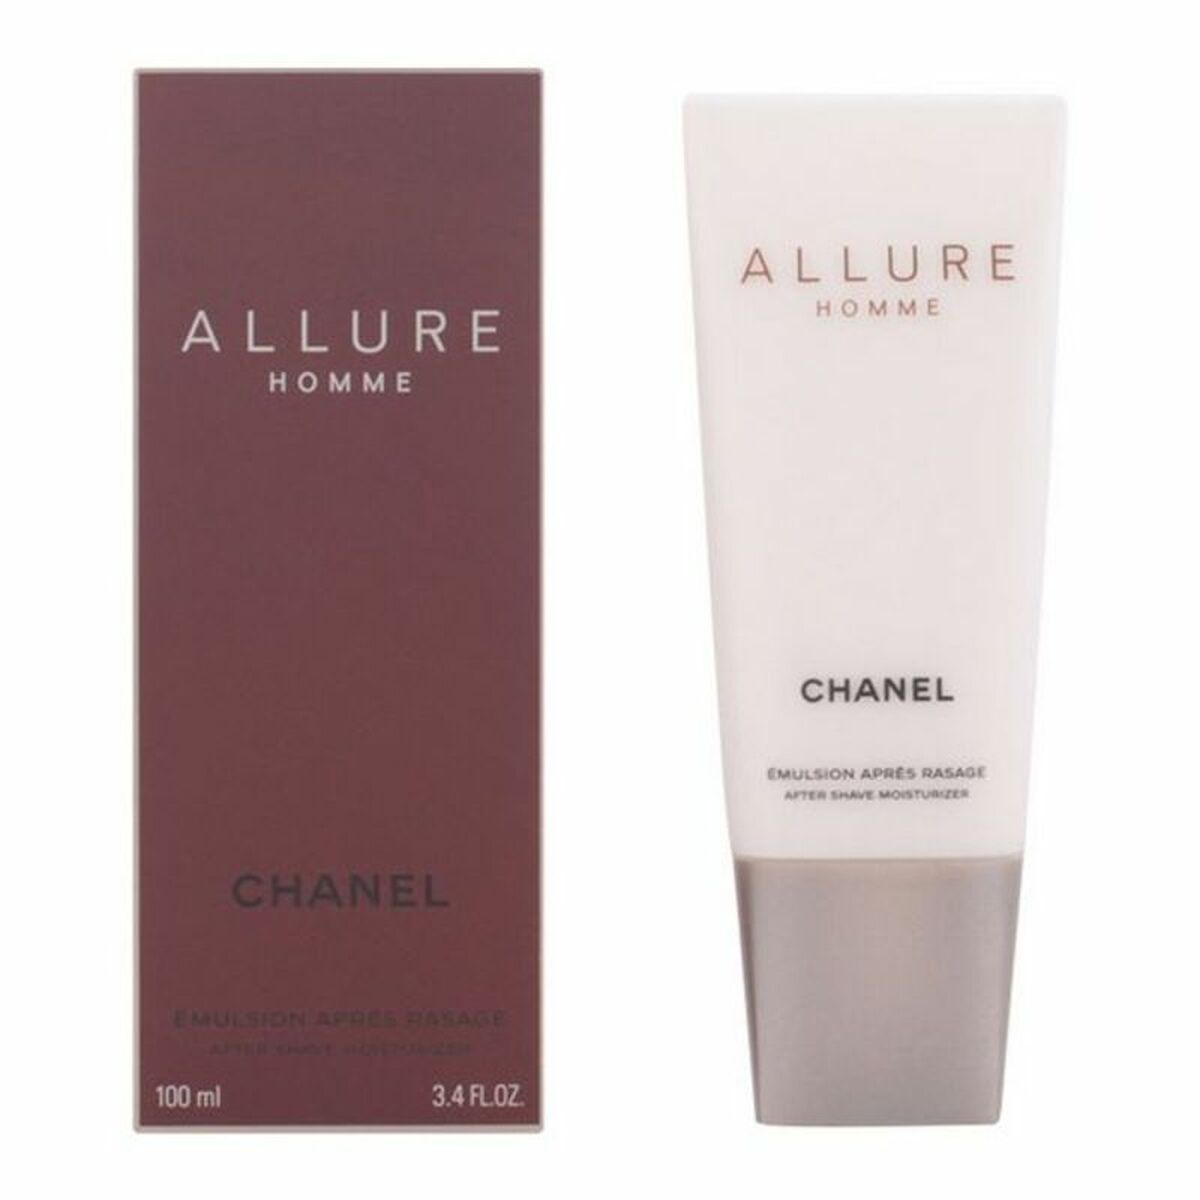 Aftershave-Balsam Chanel Allure Homme 100 ml